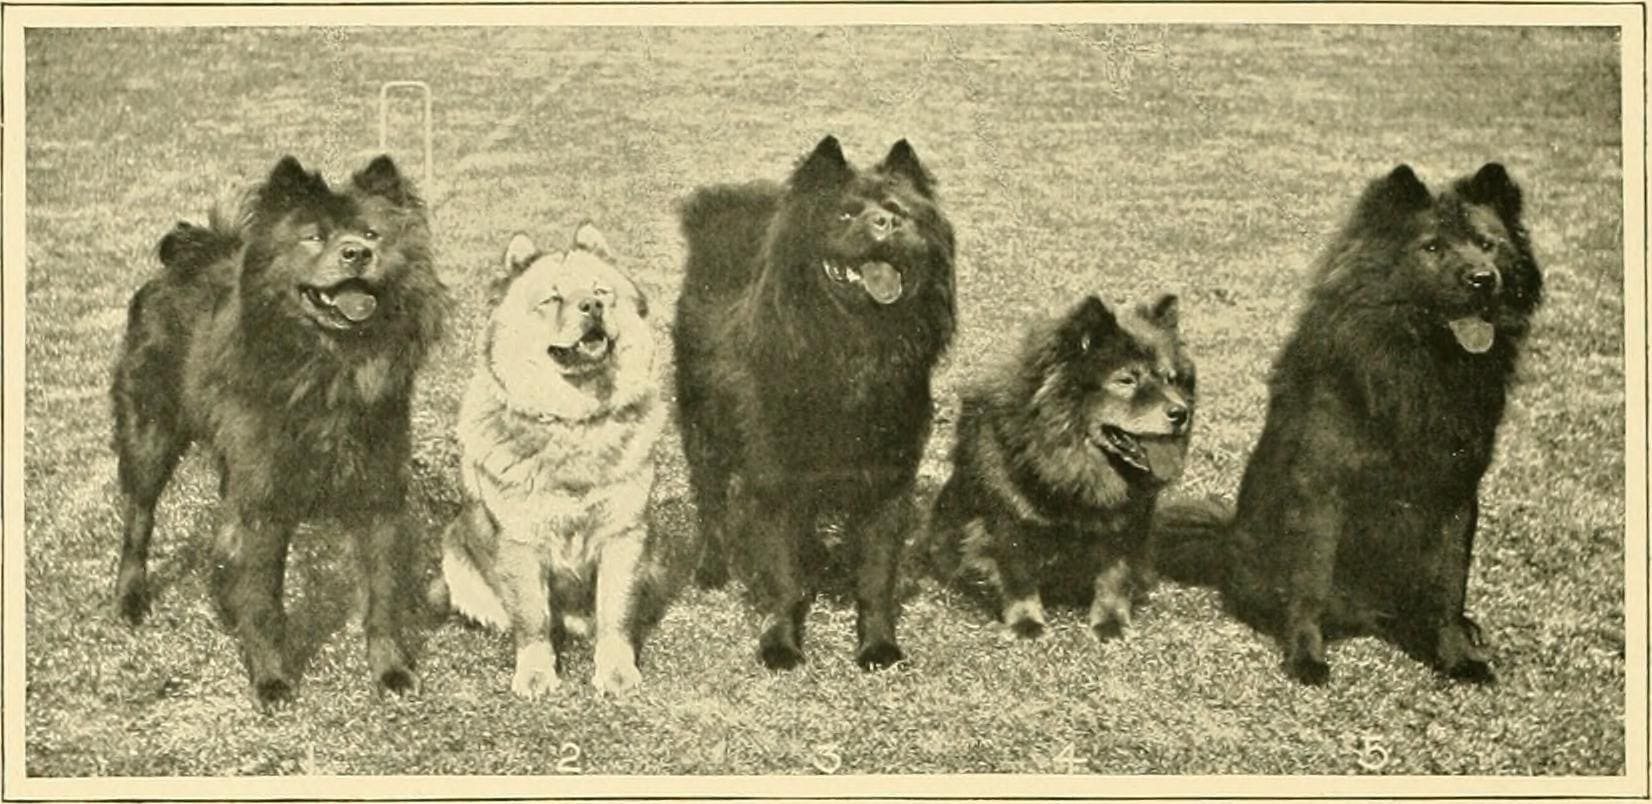 1865-1930 HISTORY TIMELINE- Earliest Chows and Breeders of England and America - CHOWTALES1652 x 804